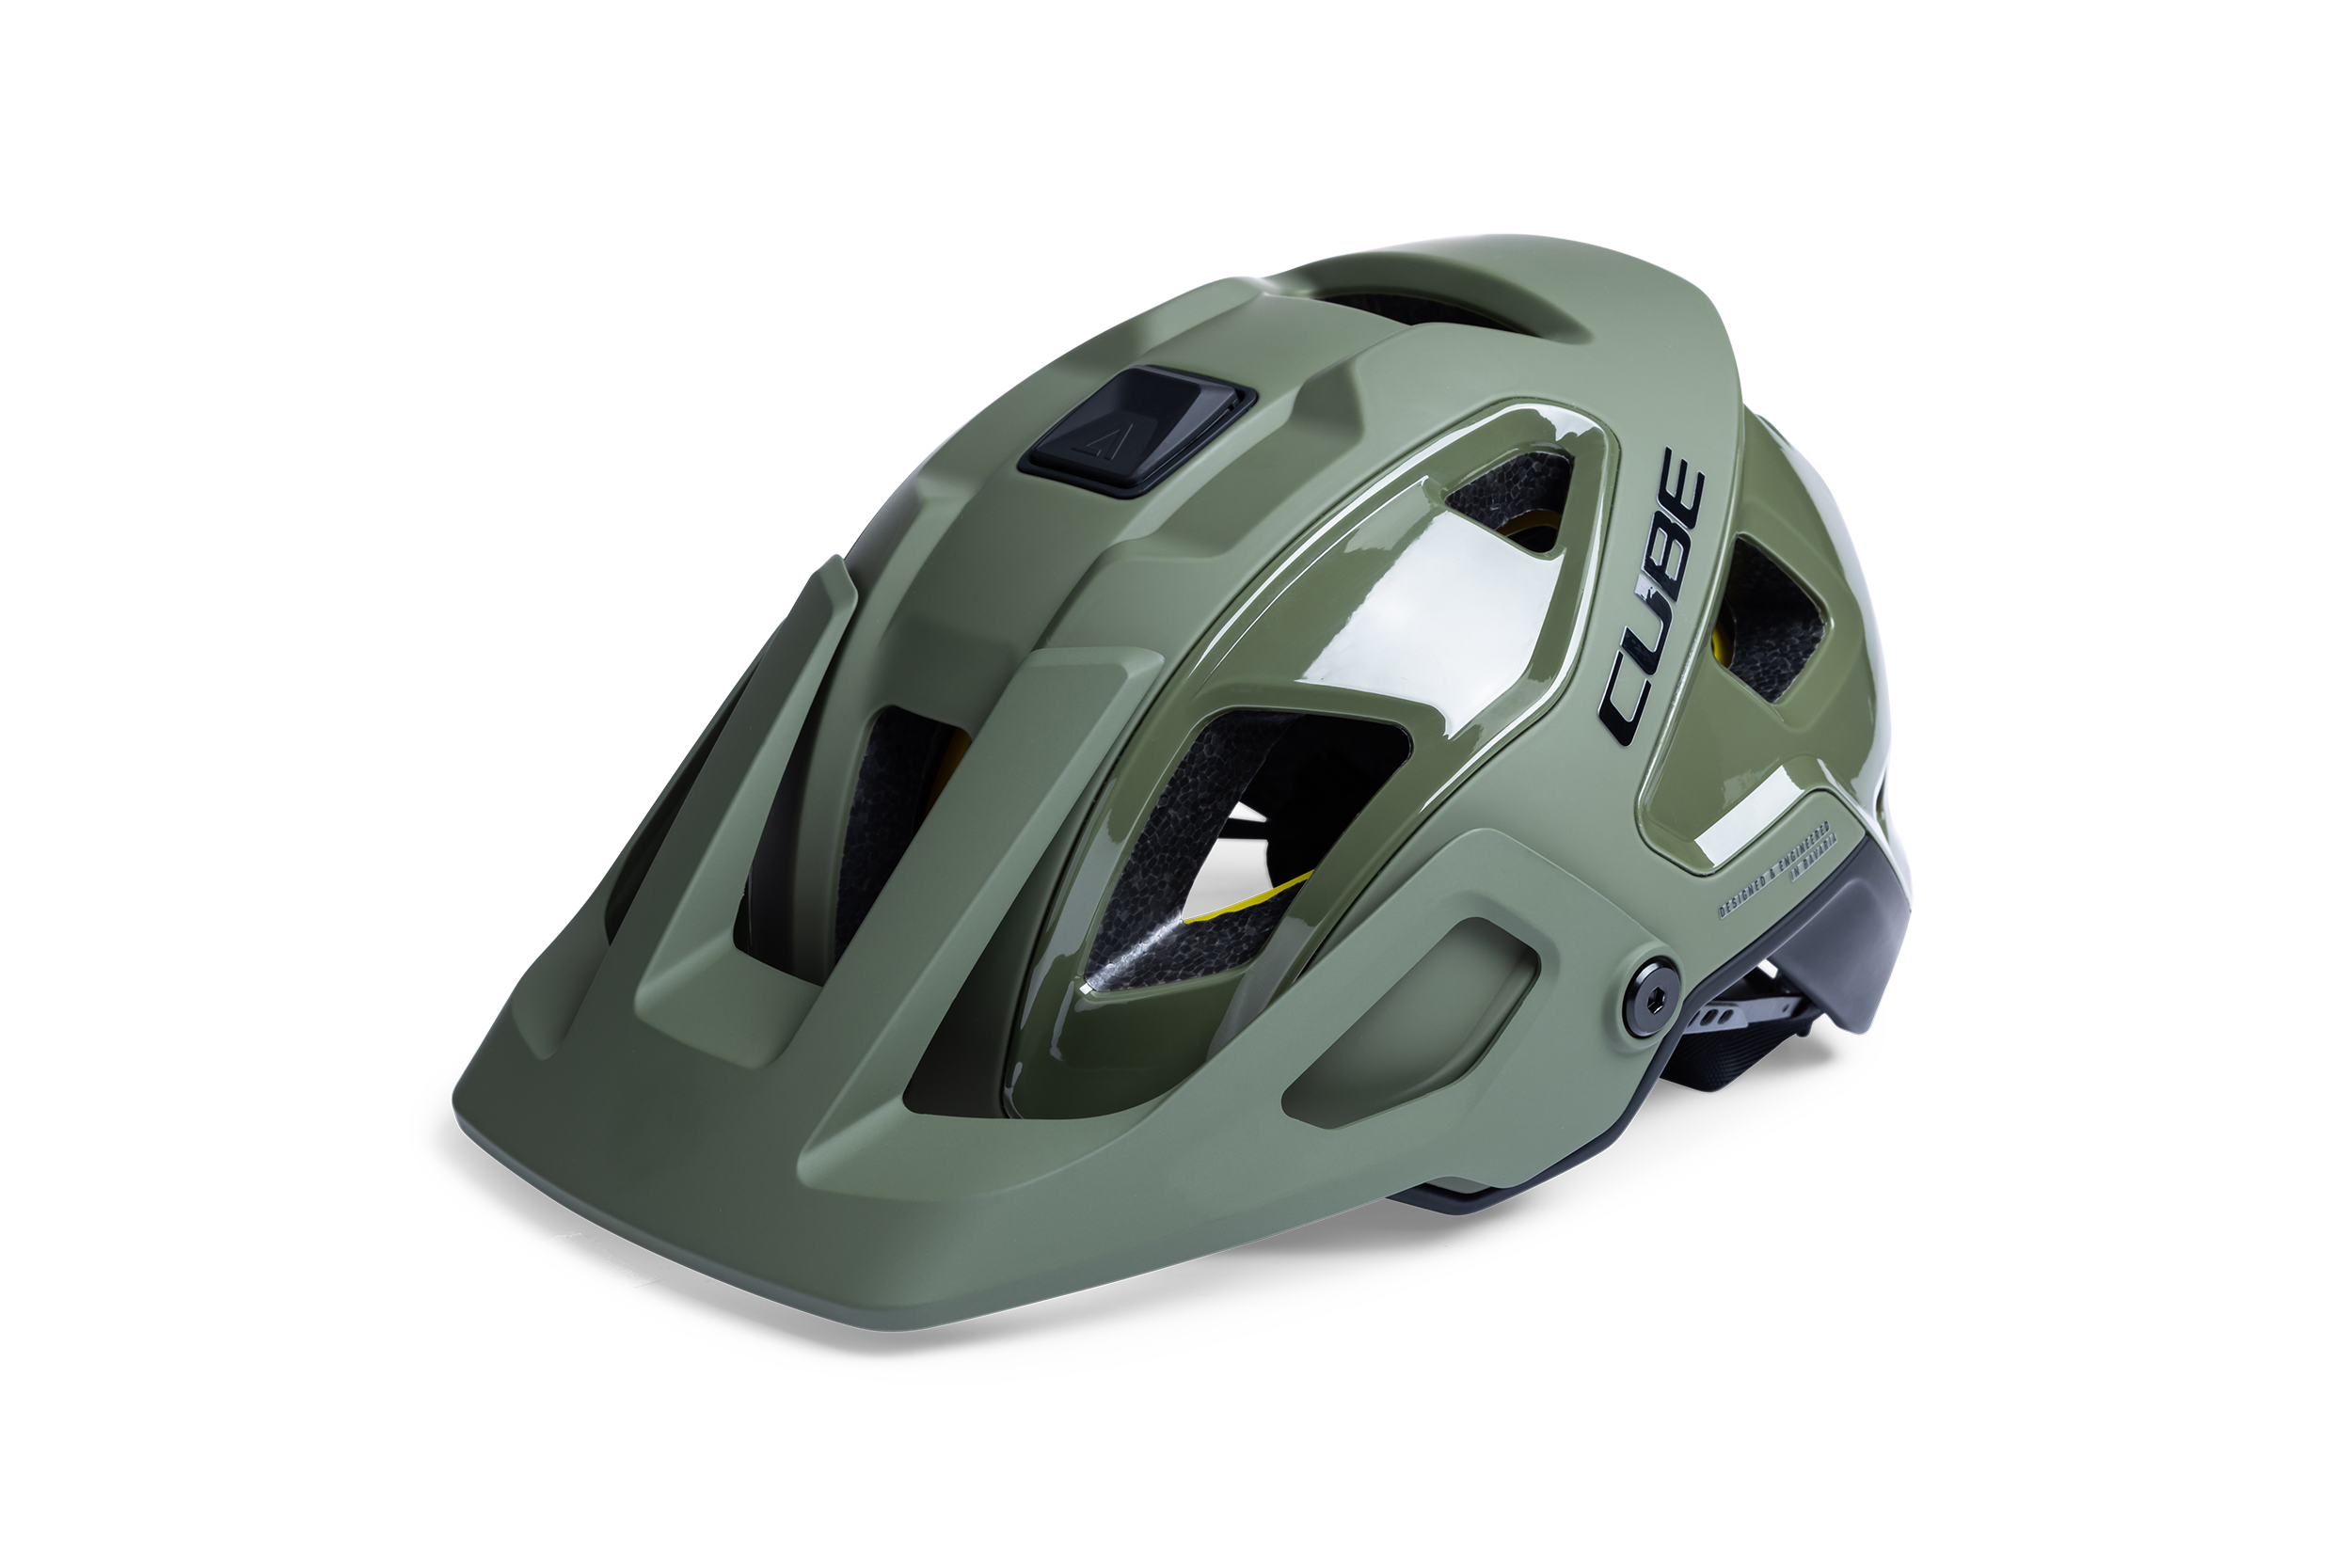 CUBE Helm STROVER TM